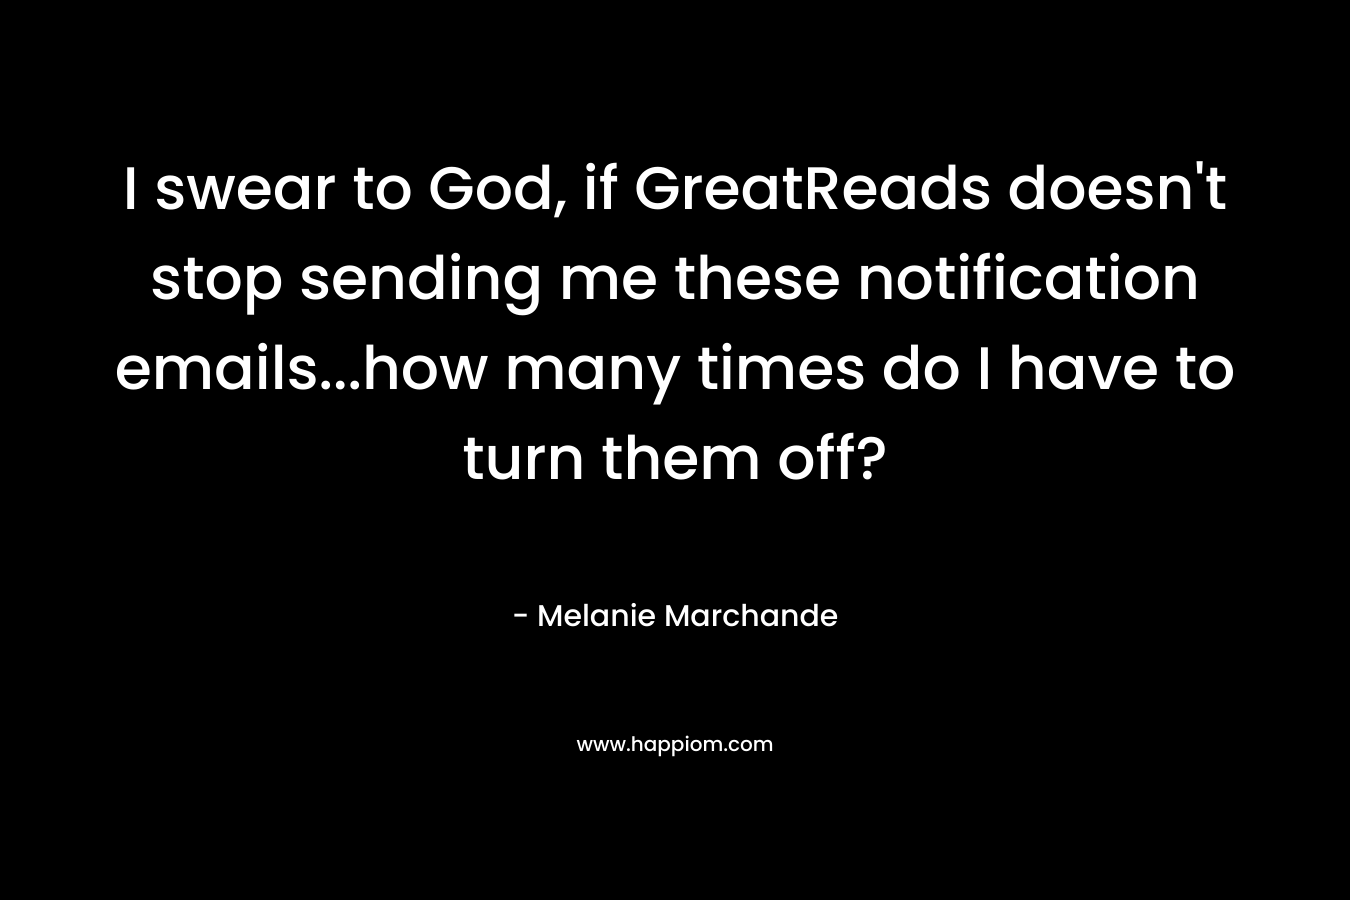 I swear to God, if GreatReads doesn’t stop sending me these notification emails…how many times do I have to turn them off? – Melanie Marchande